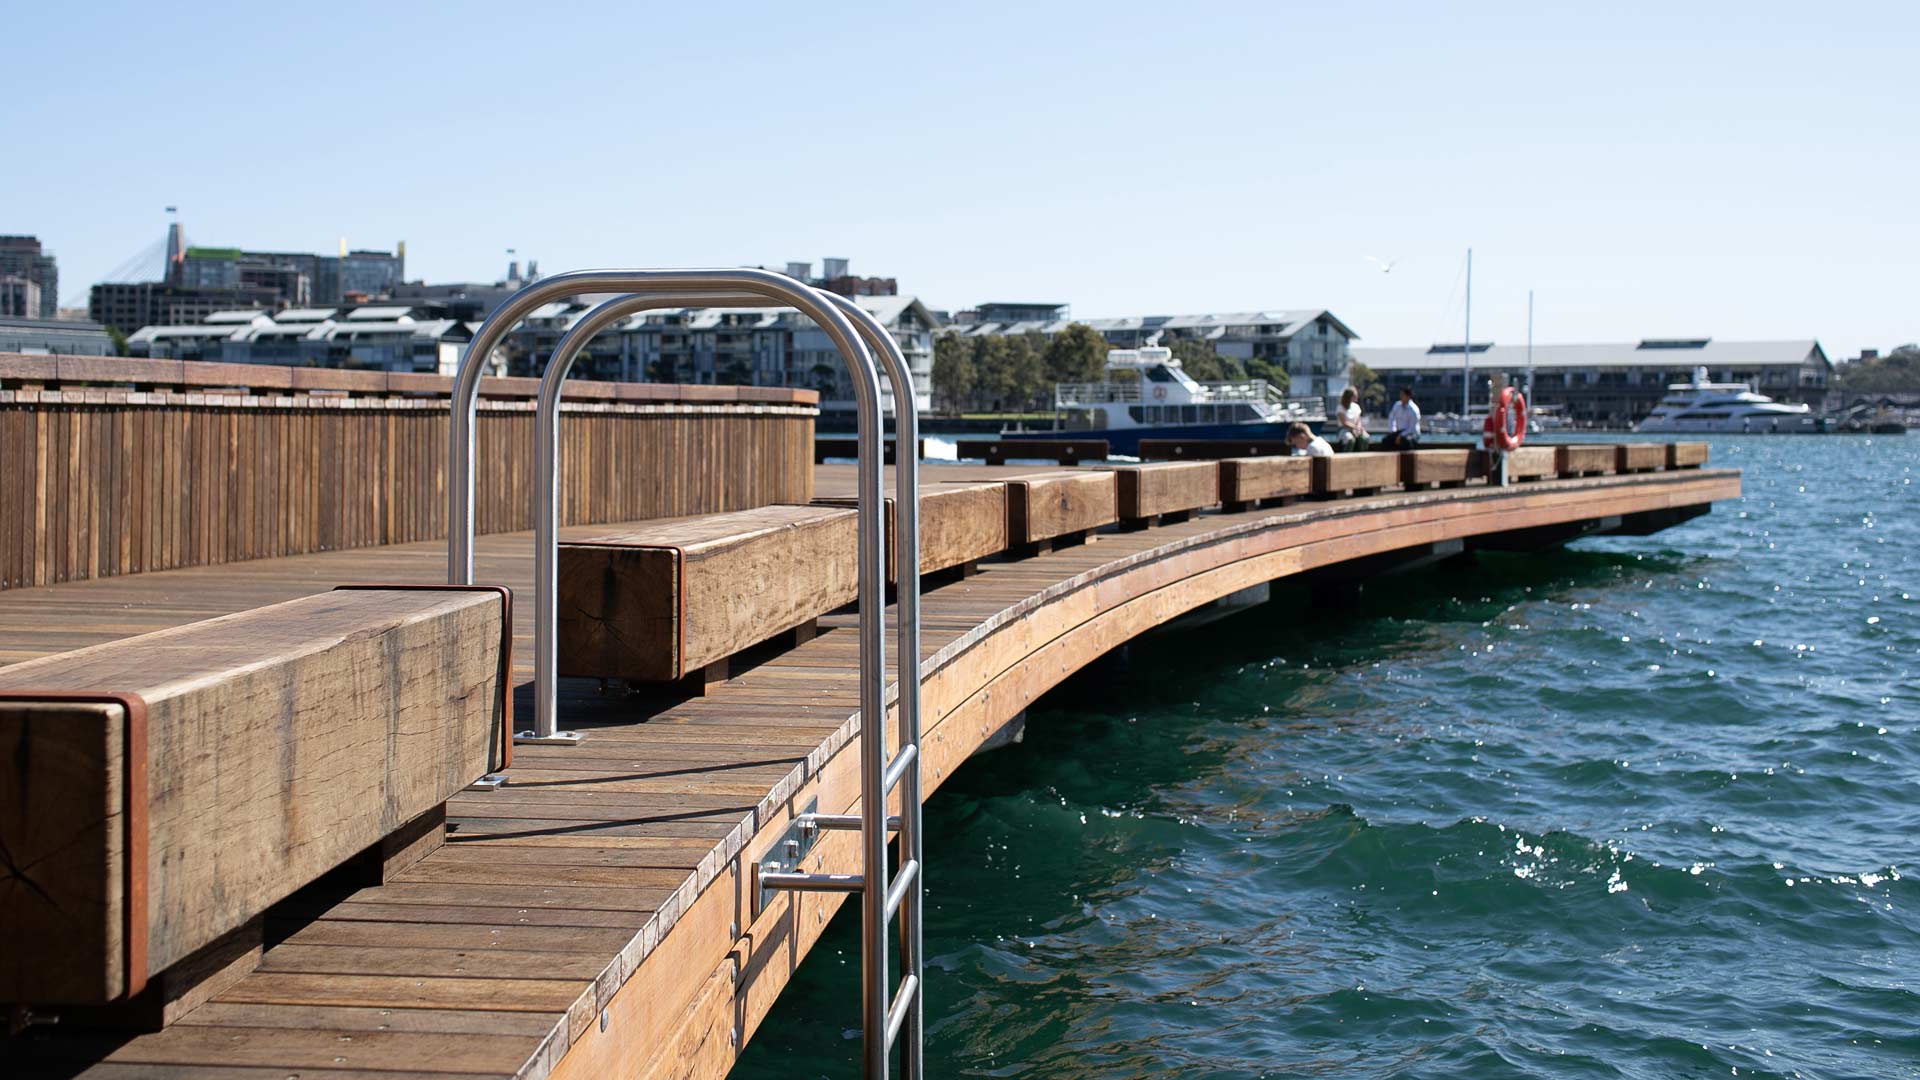 Barangaroo Is Now Home to a Massive Amphitheatre-Style Boardwalk on the Waterfront